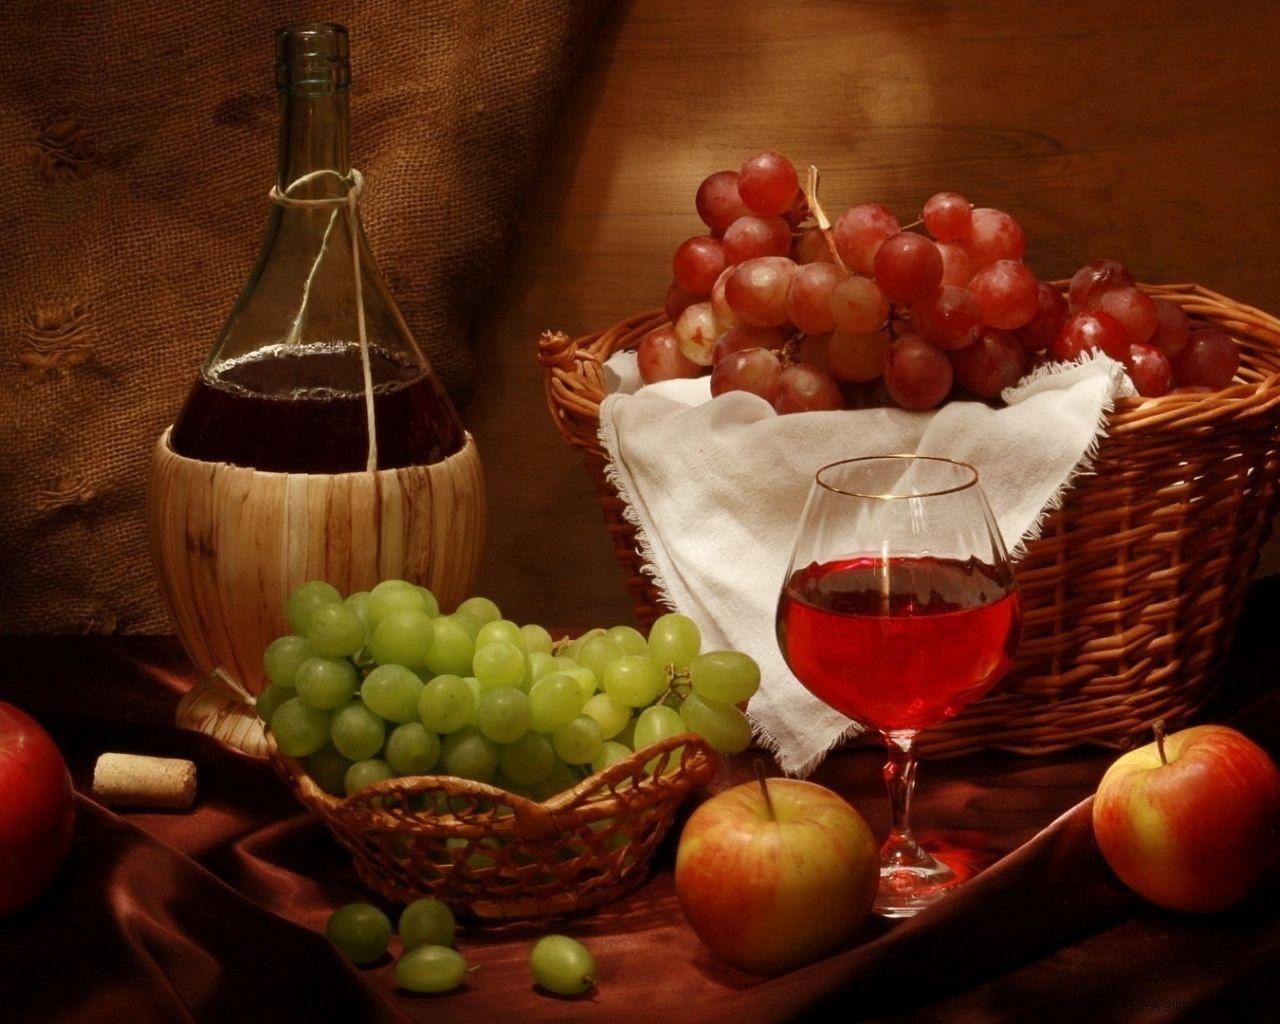 Food And Drink HD Wallpaper Photo. Food And Drink HD Wallpaper